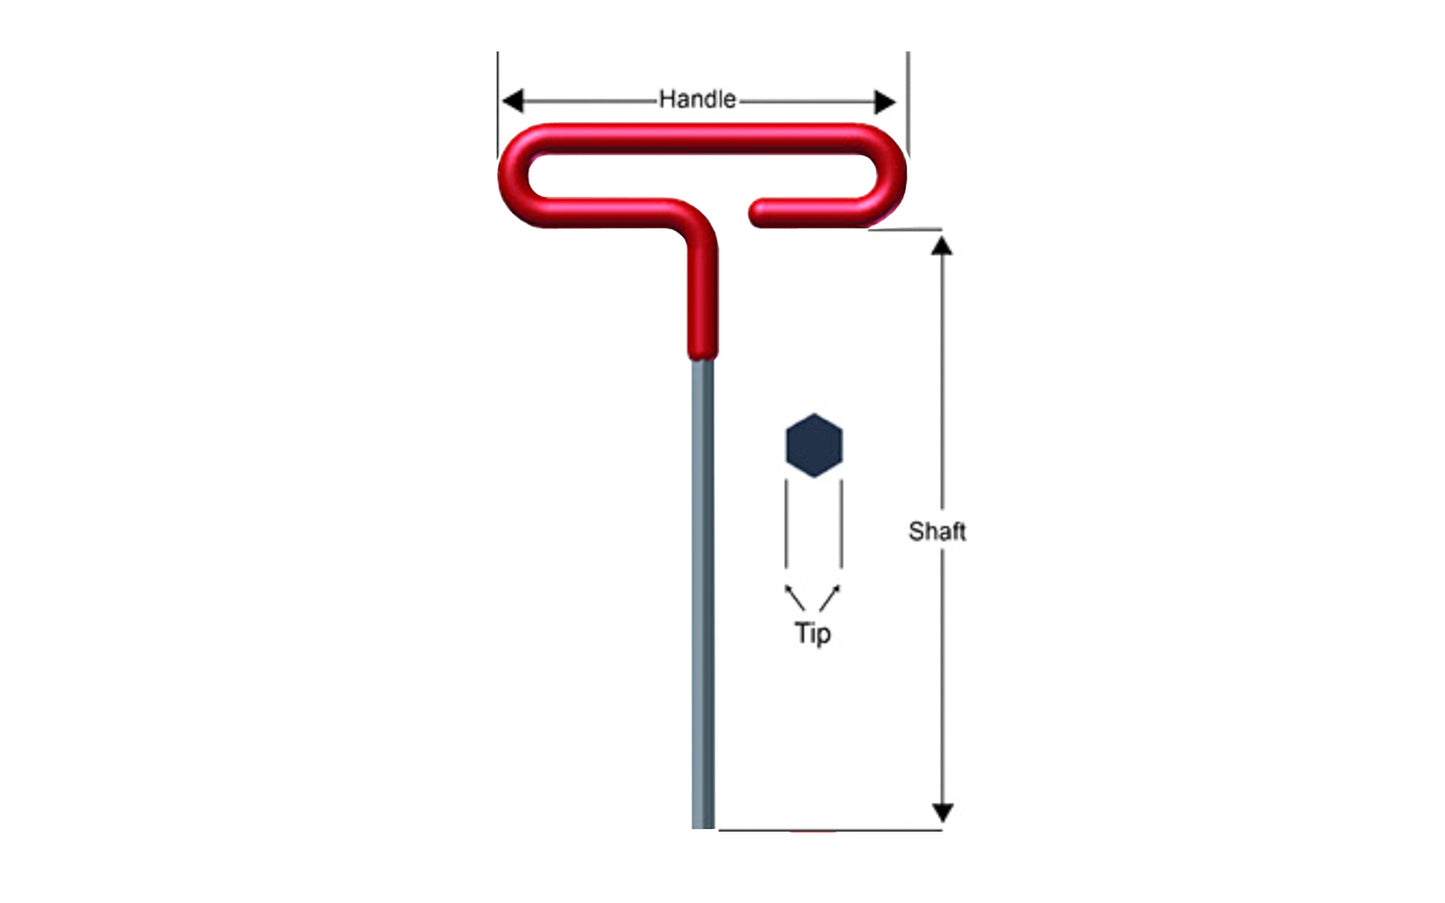 This quality Eklind Cushion Grip SAE Hex T-Key is manufactured using the finest quality alloy steel. Available in 3/32", 7/64", 1/8", 9/64", 5/32", 3/16", 7/32", 1/4", 5/16", & 3/8" sizes. 6" length shaft. Hardened, tempered & finished with Eklind black finish to resist rust. Allen T-handle hex key wrench. Made in USA.